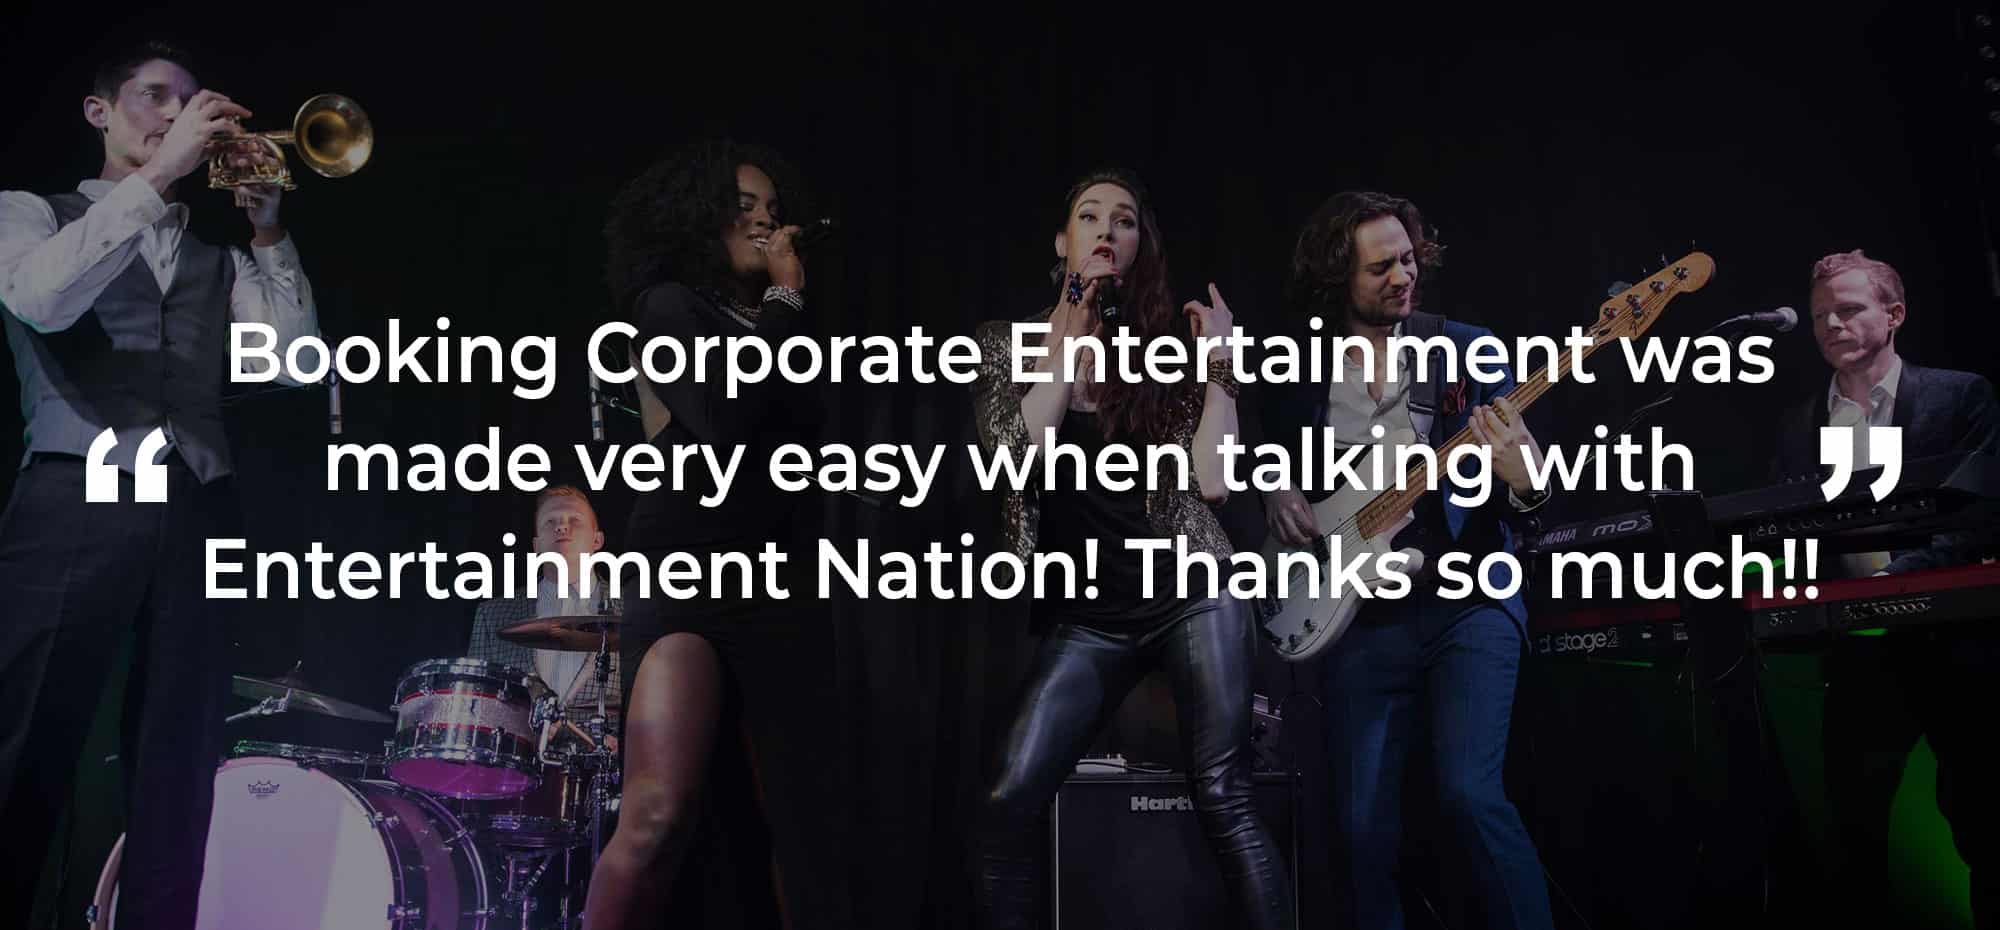 Review of Corporate Entertainment Plymouth